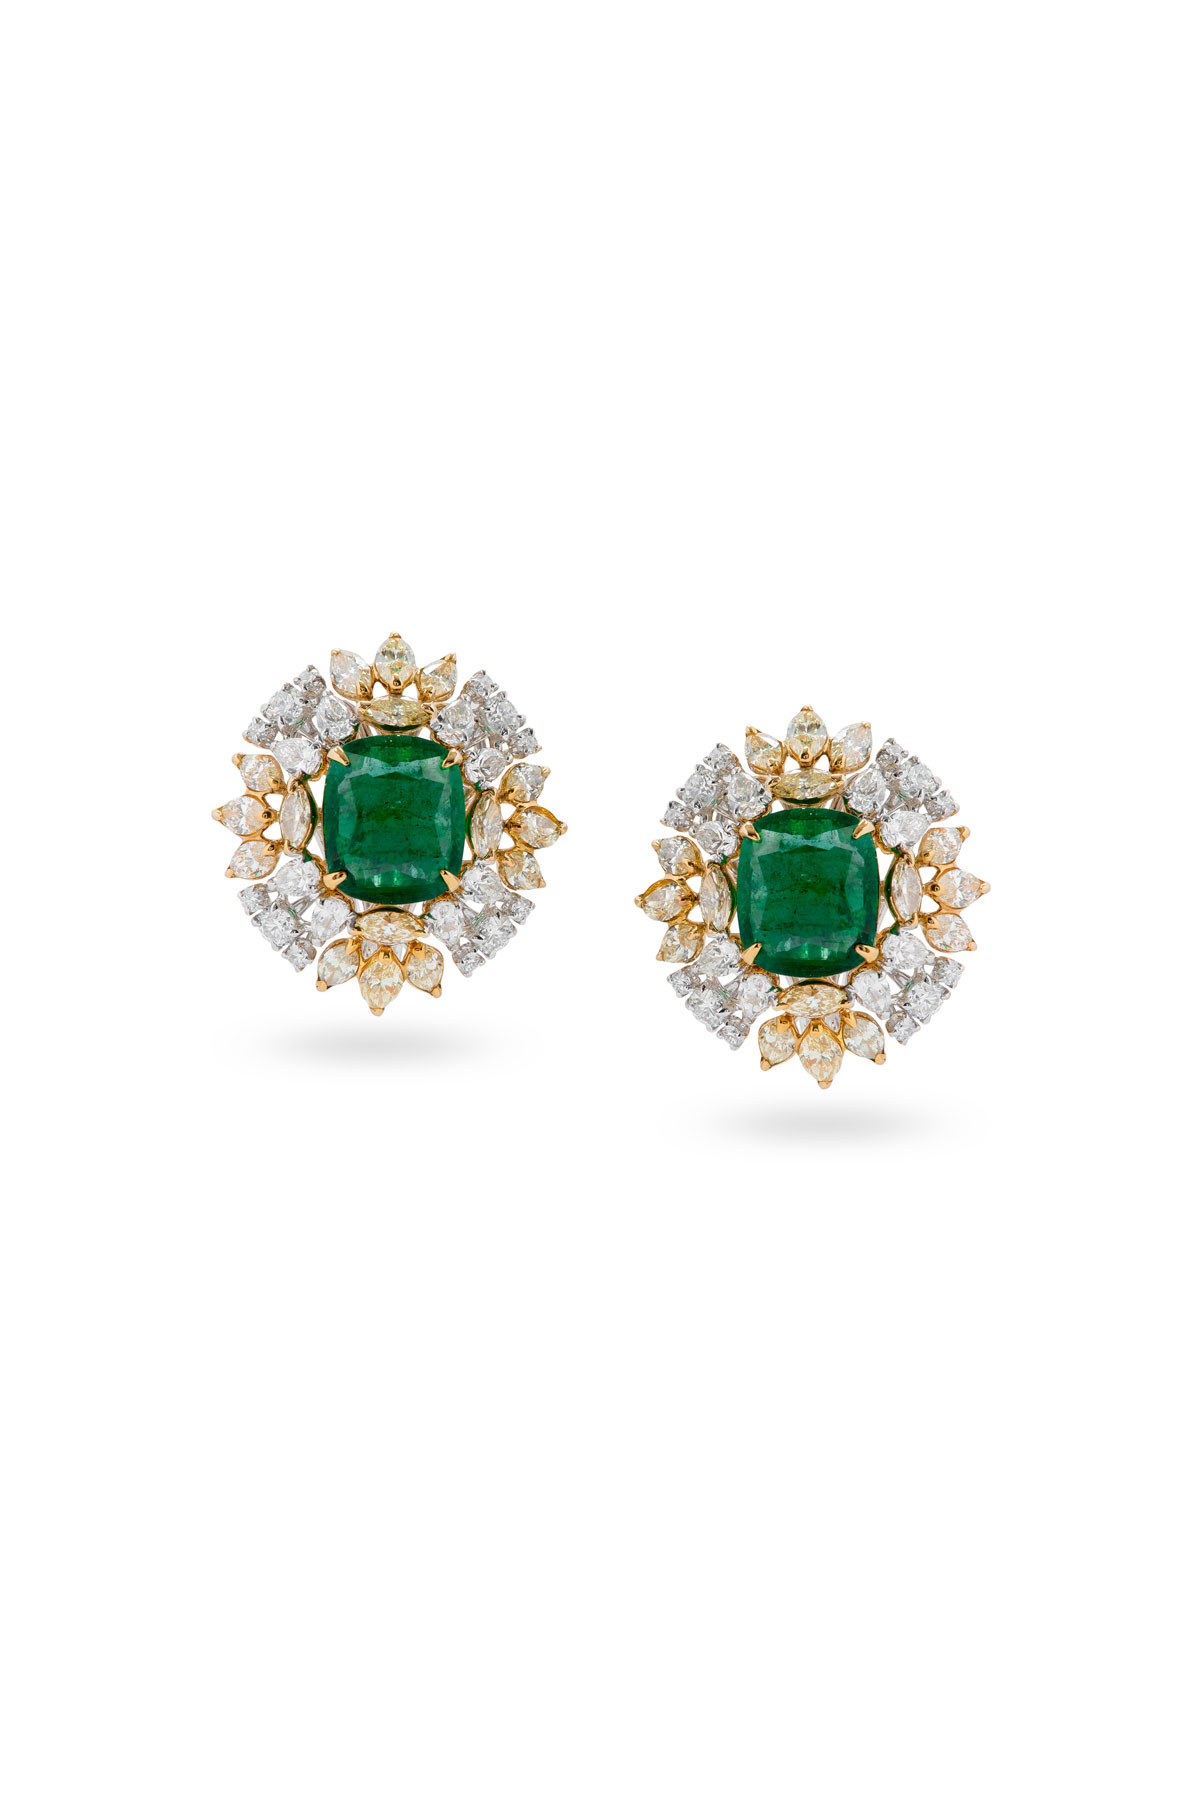 Details more than 70 emerald and diamond earrings tiffany latest ...